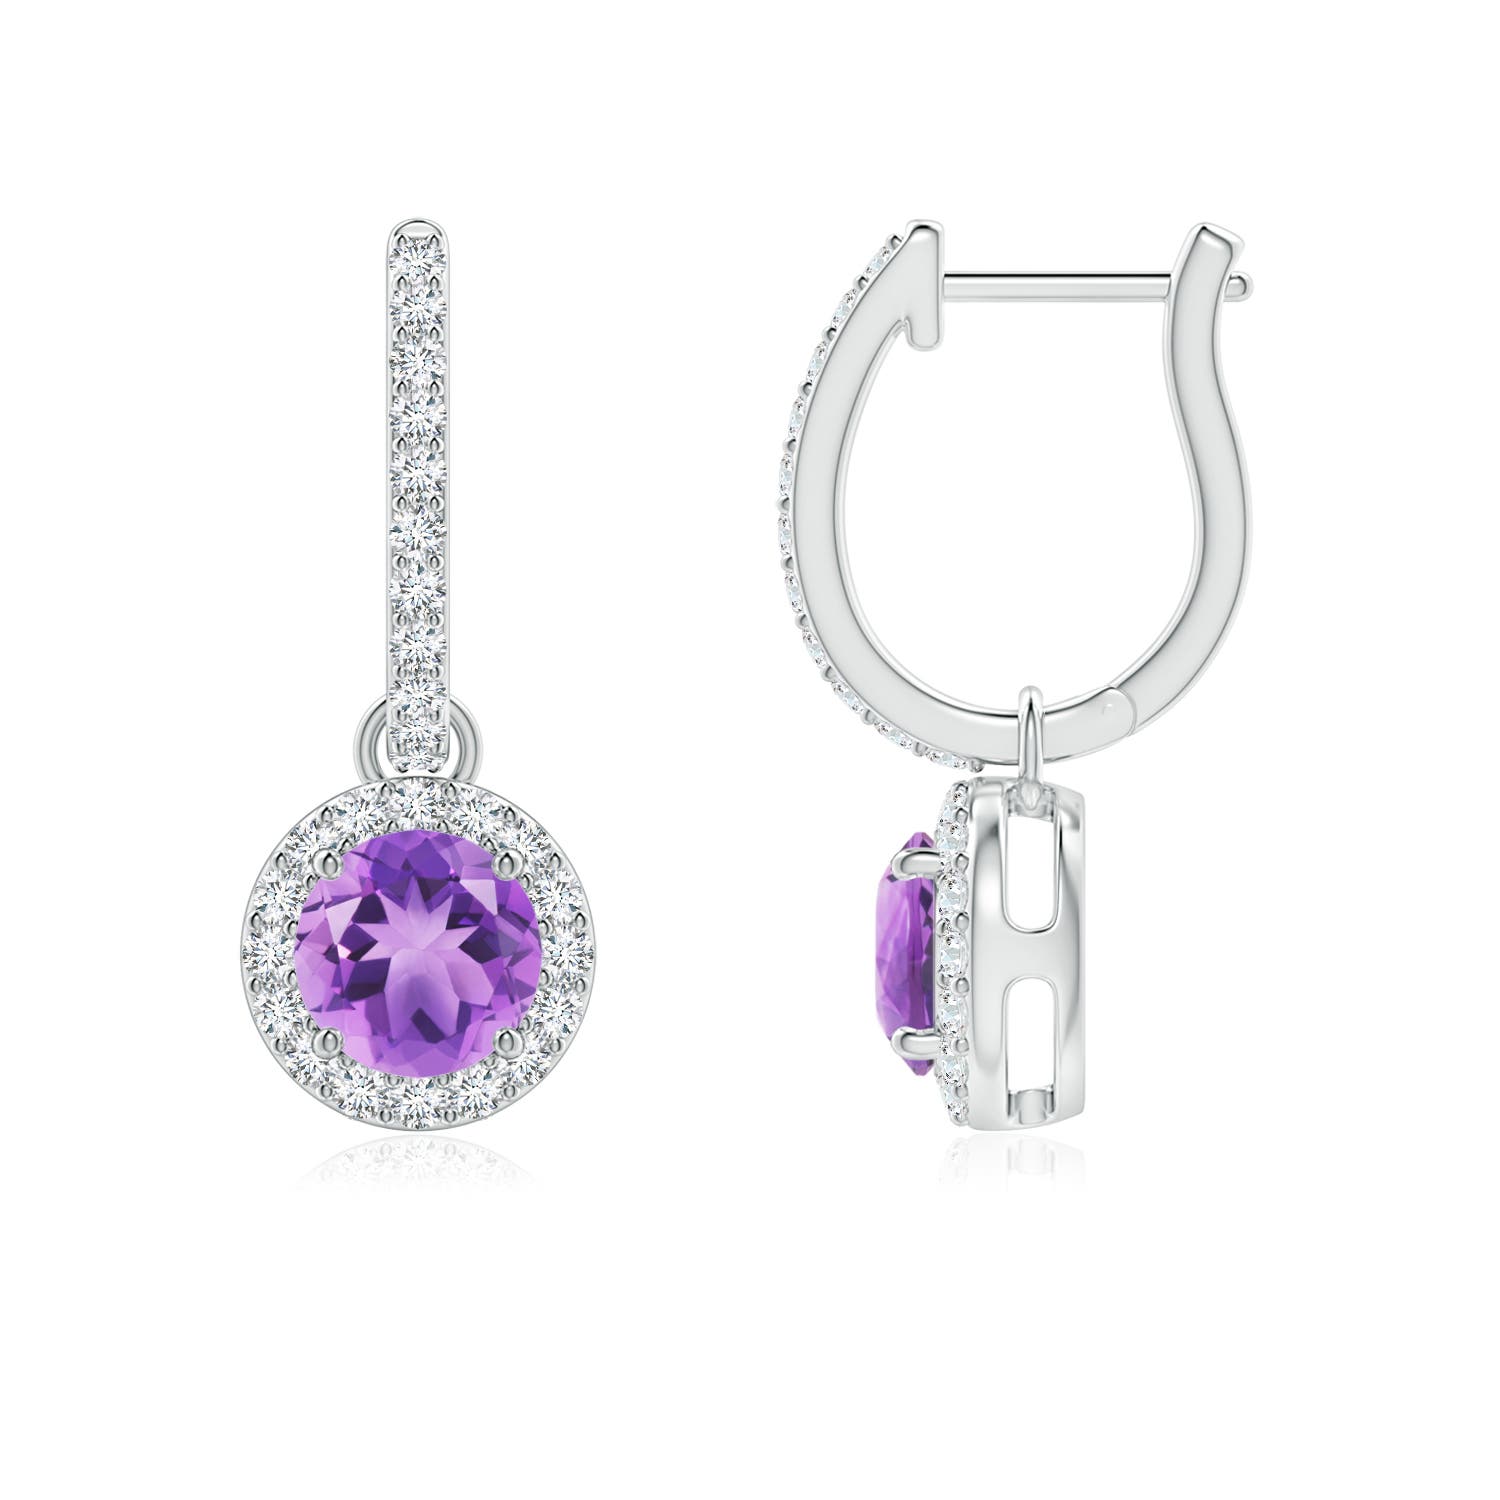 A - Amethyst / 1.22 CT / 14 KT White Gold